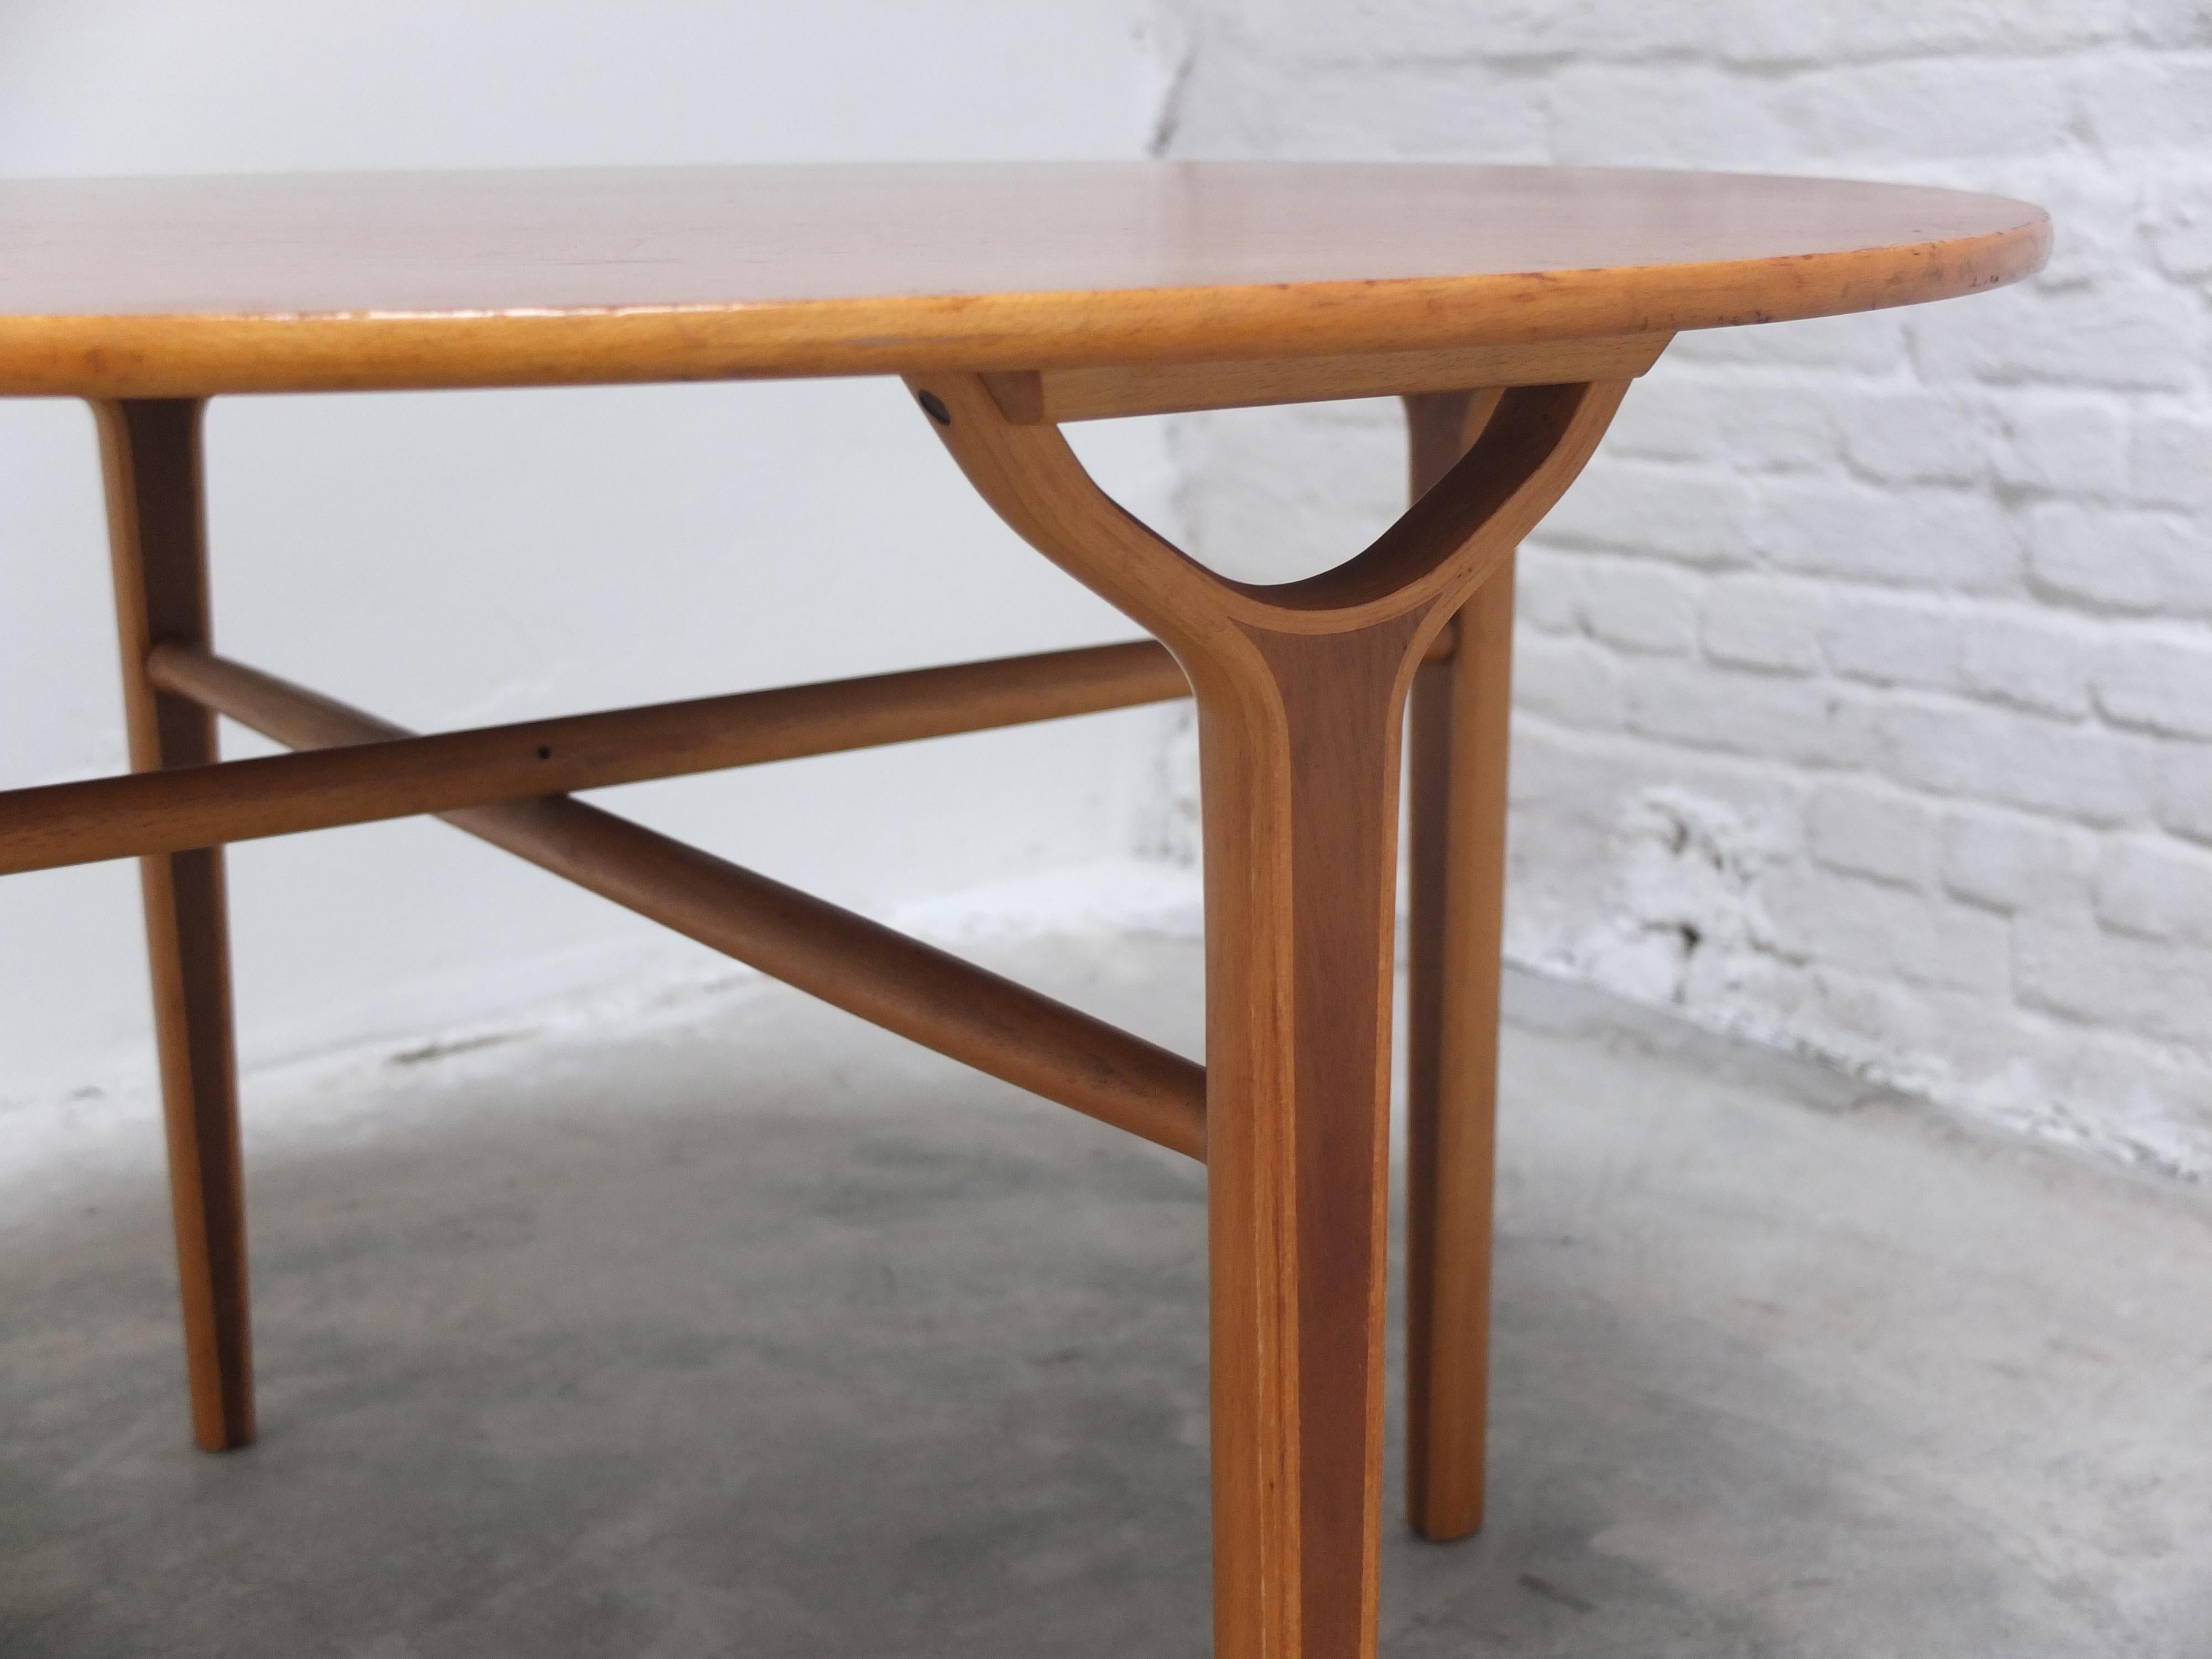 20th Century Rare 'AX' Coffee Table by Peter Hvidt & Orla Mølgaard for Fritz Hansen, 1951 For Sale